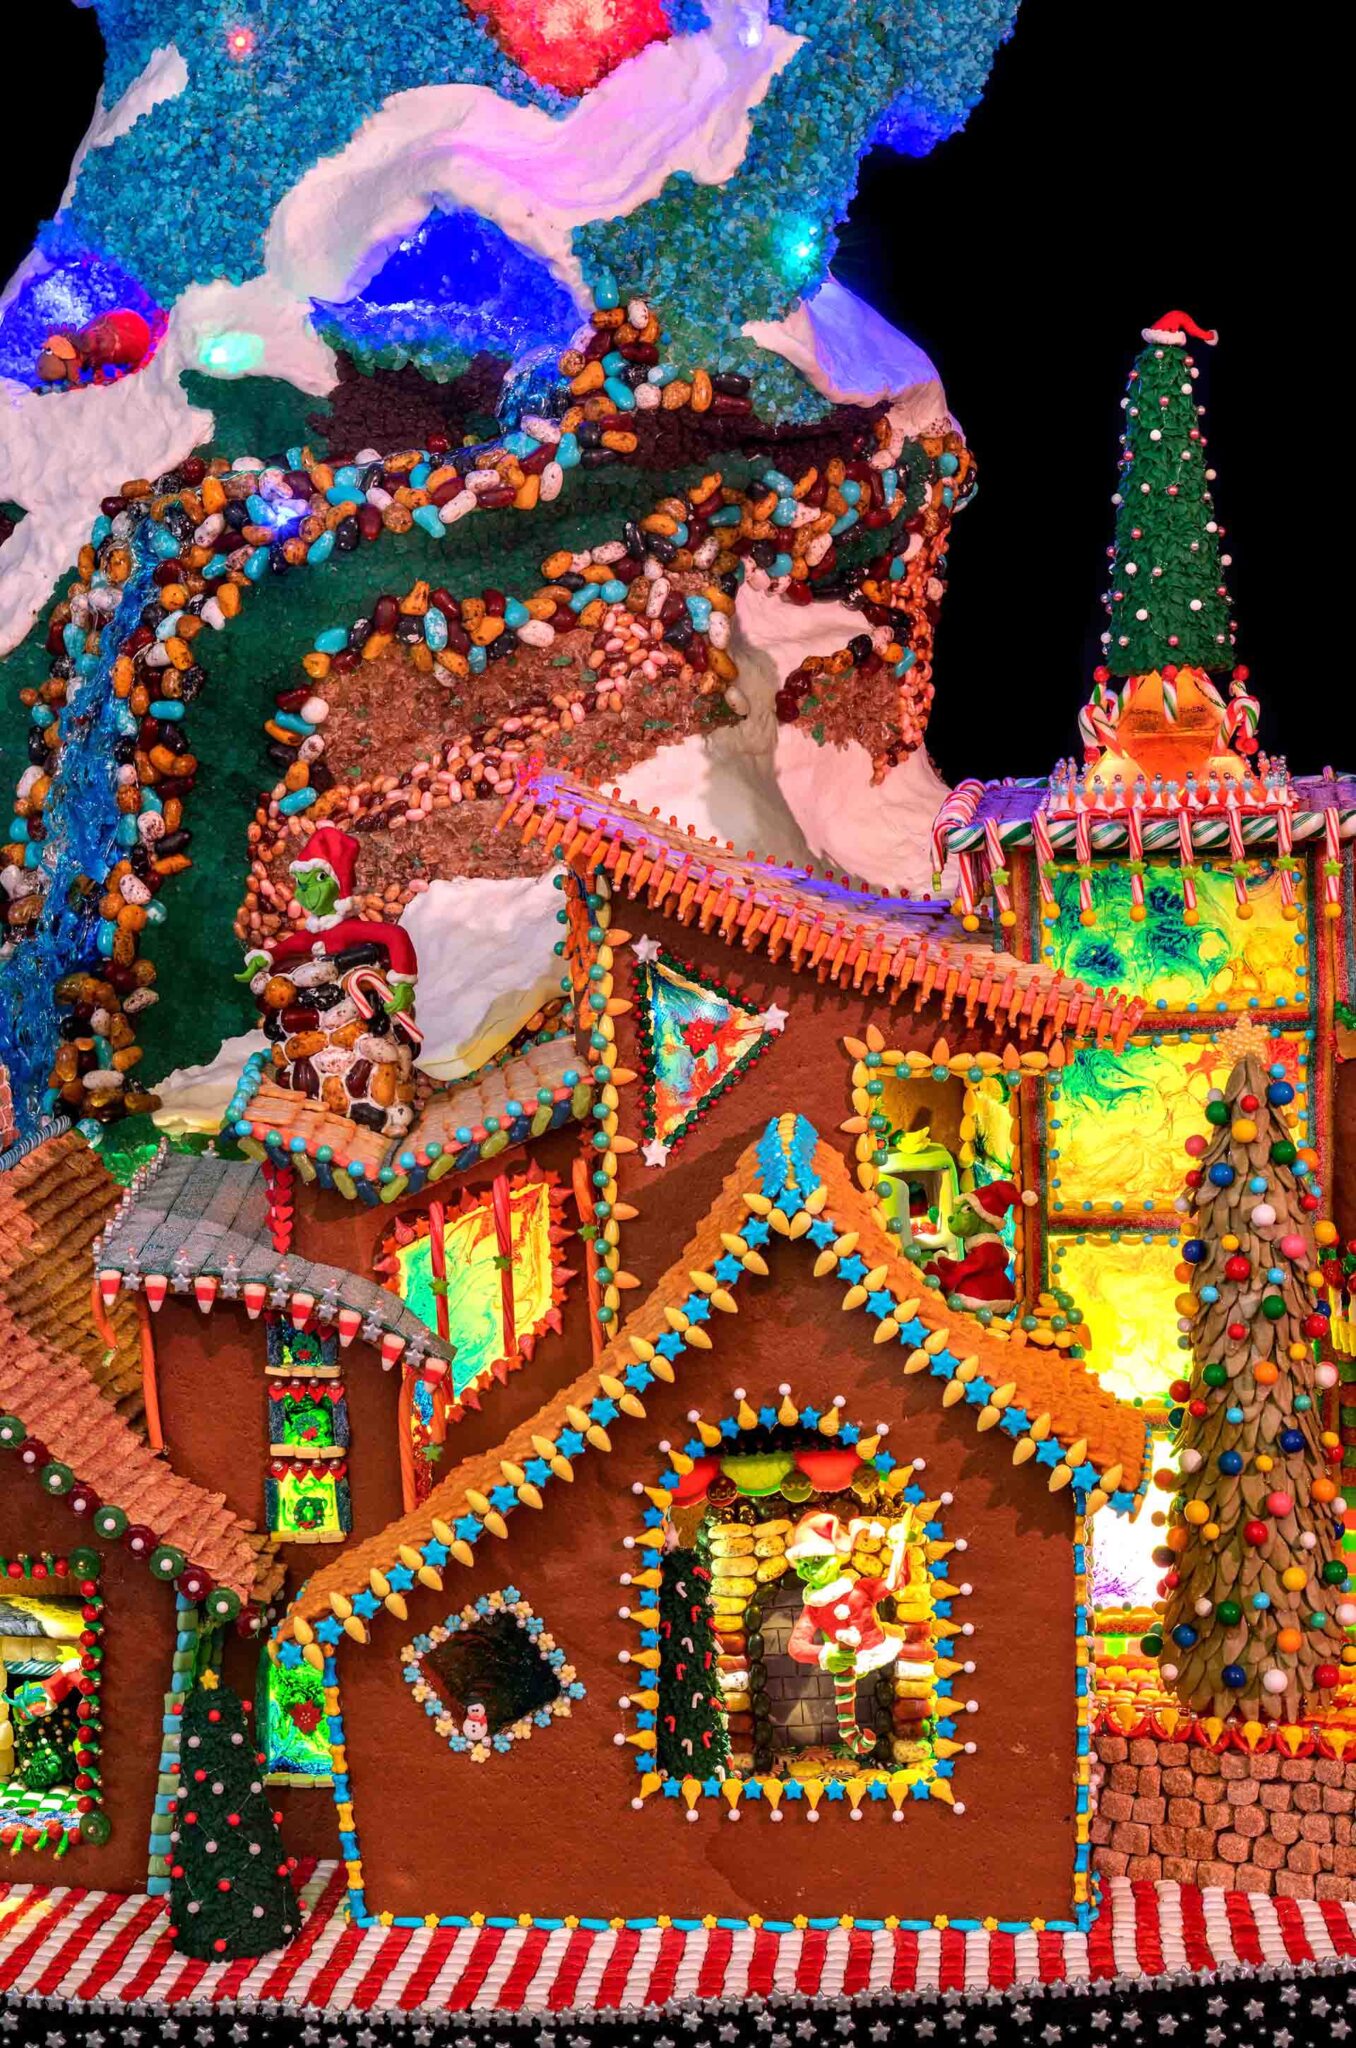 a close up of a colorful gingerbread house